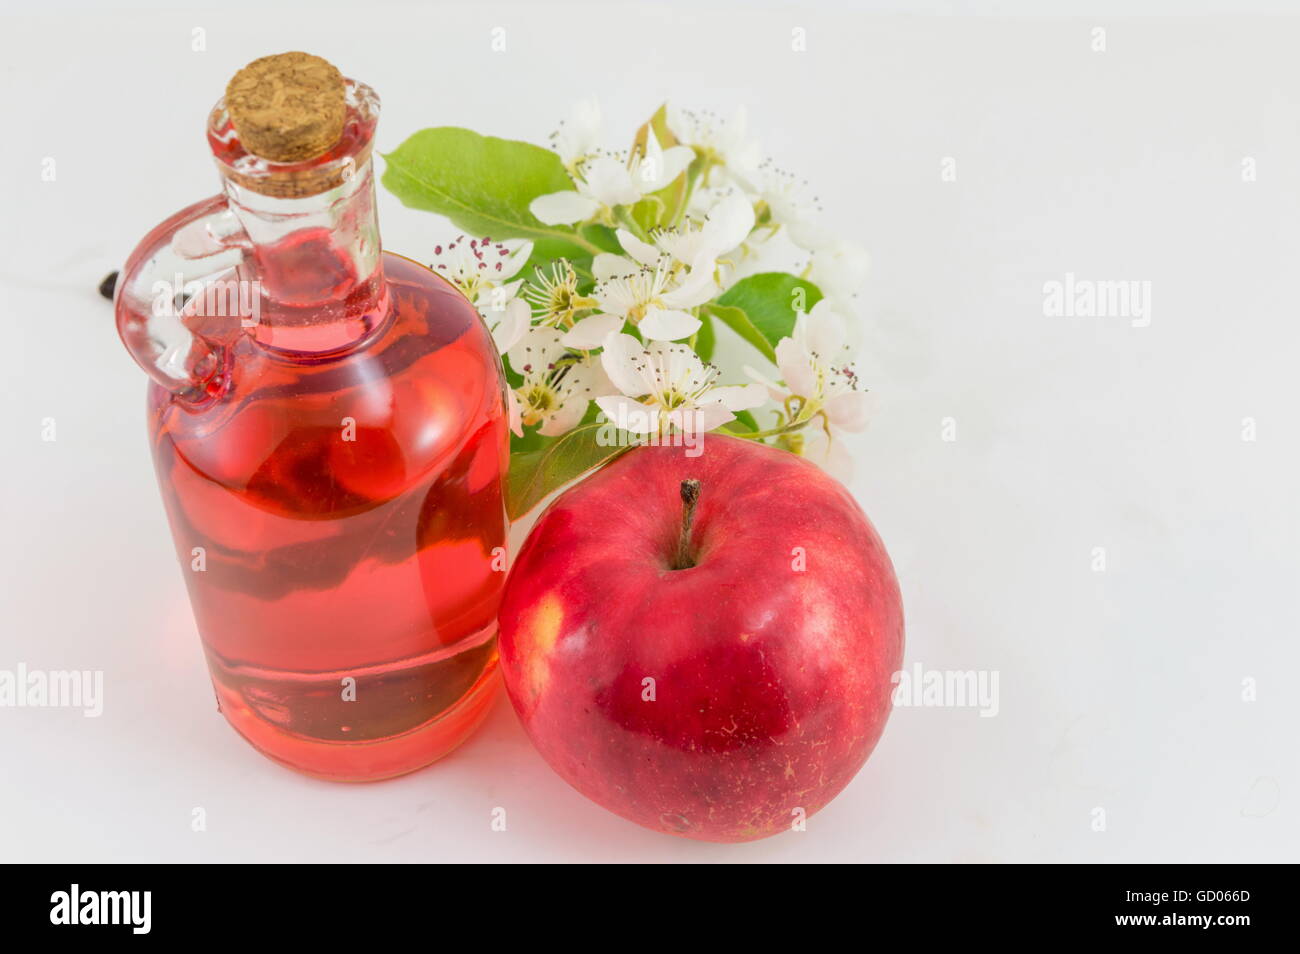 Red apple and apple vinegar decorated with flowers Stock Photo